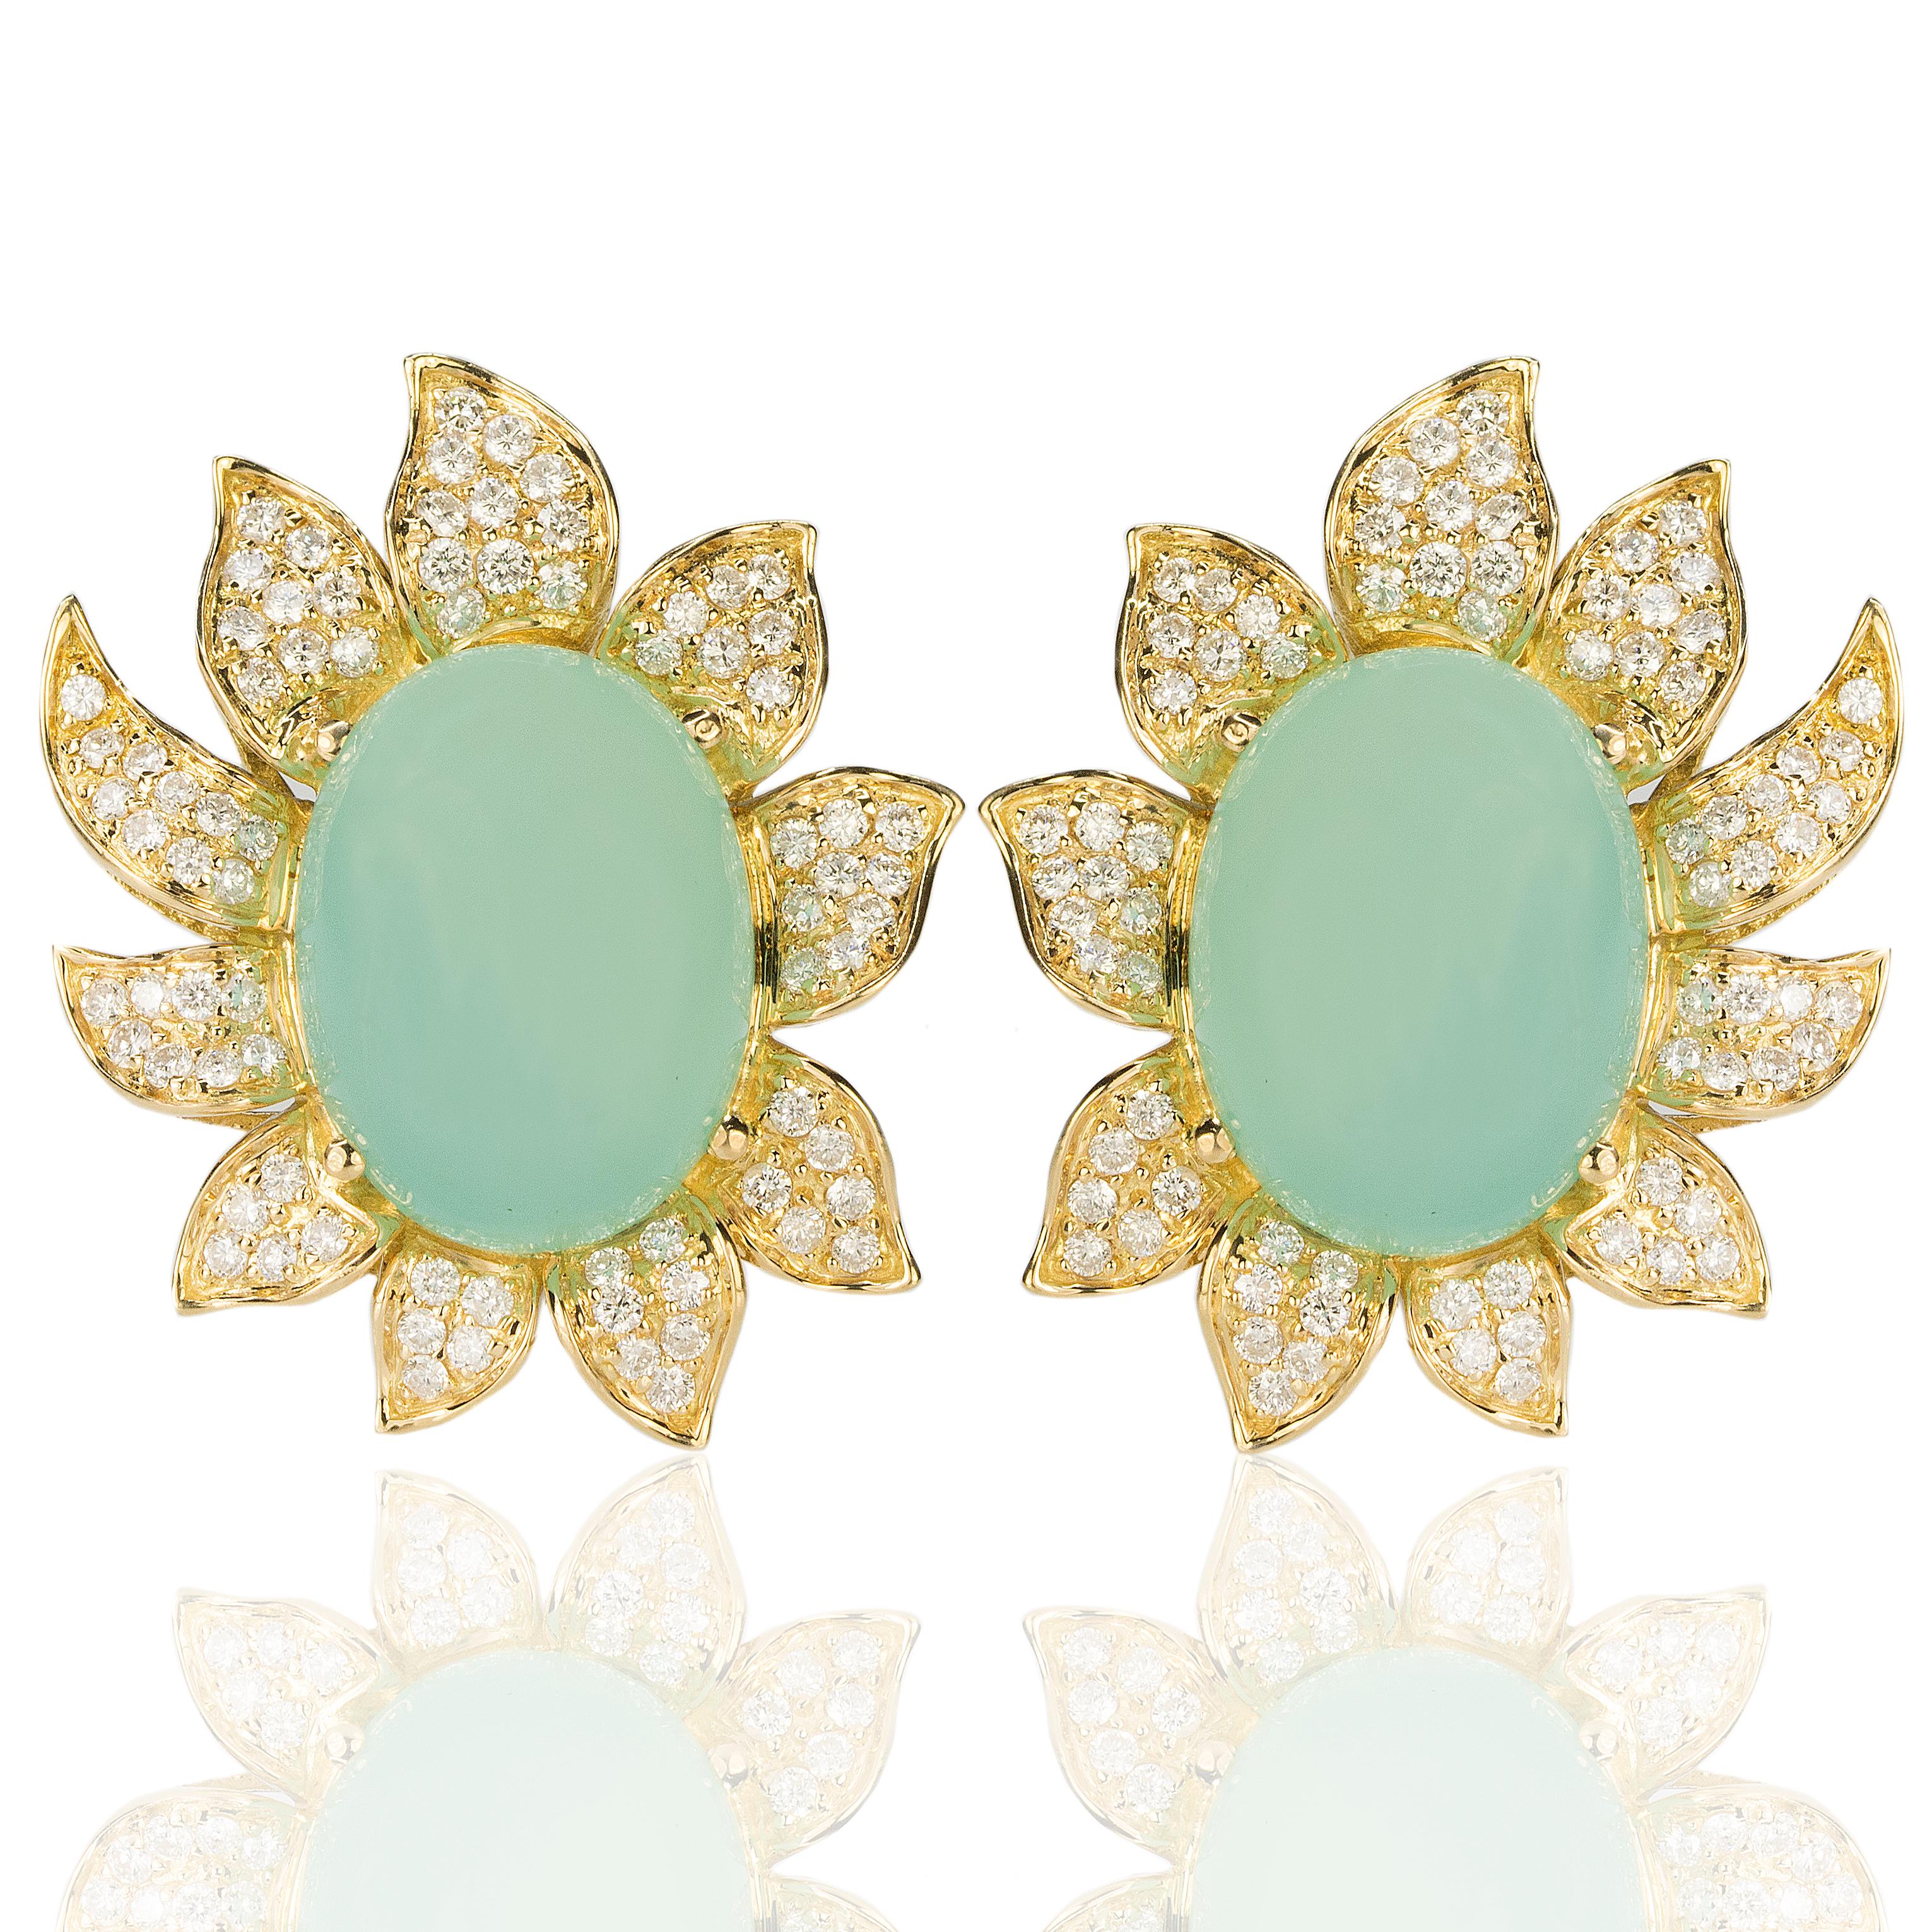 Large 18k Earrings set with two oval natural Chalcedony cabochons weighing 35.05 carats and approximately 4.50 carats of pave set modern round brilliant diamonds.